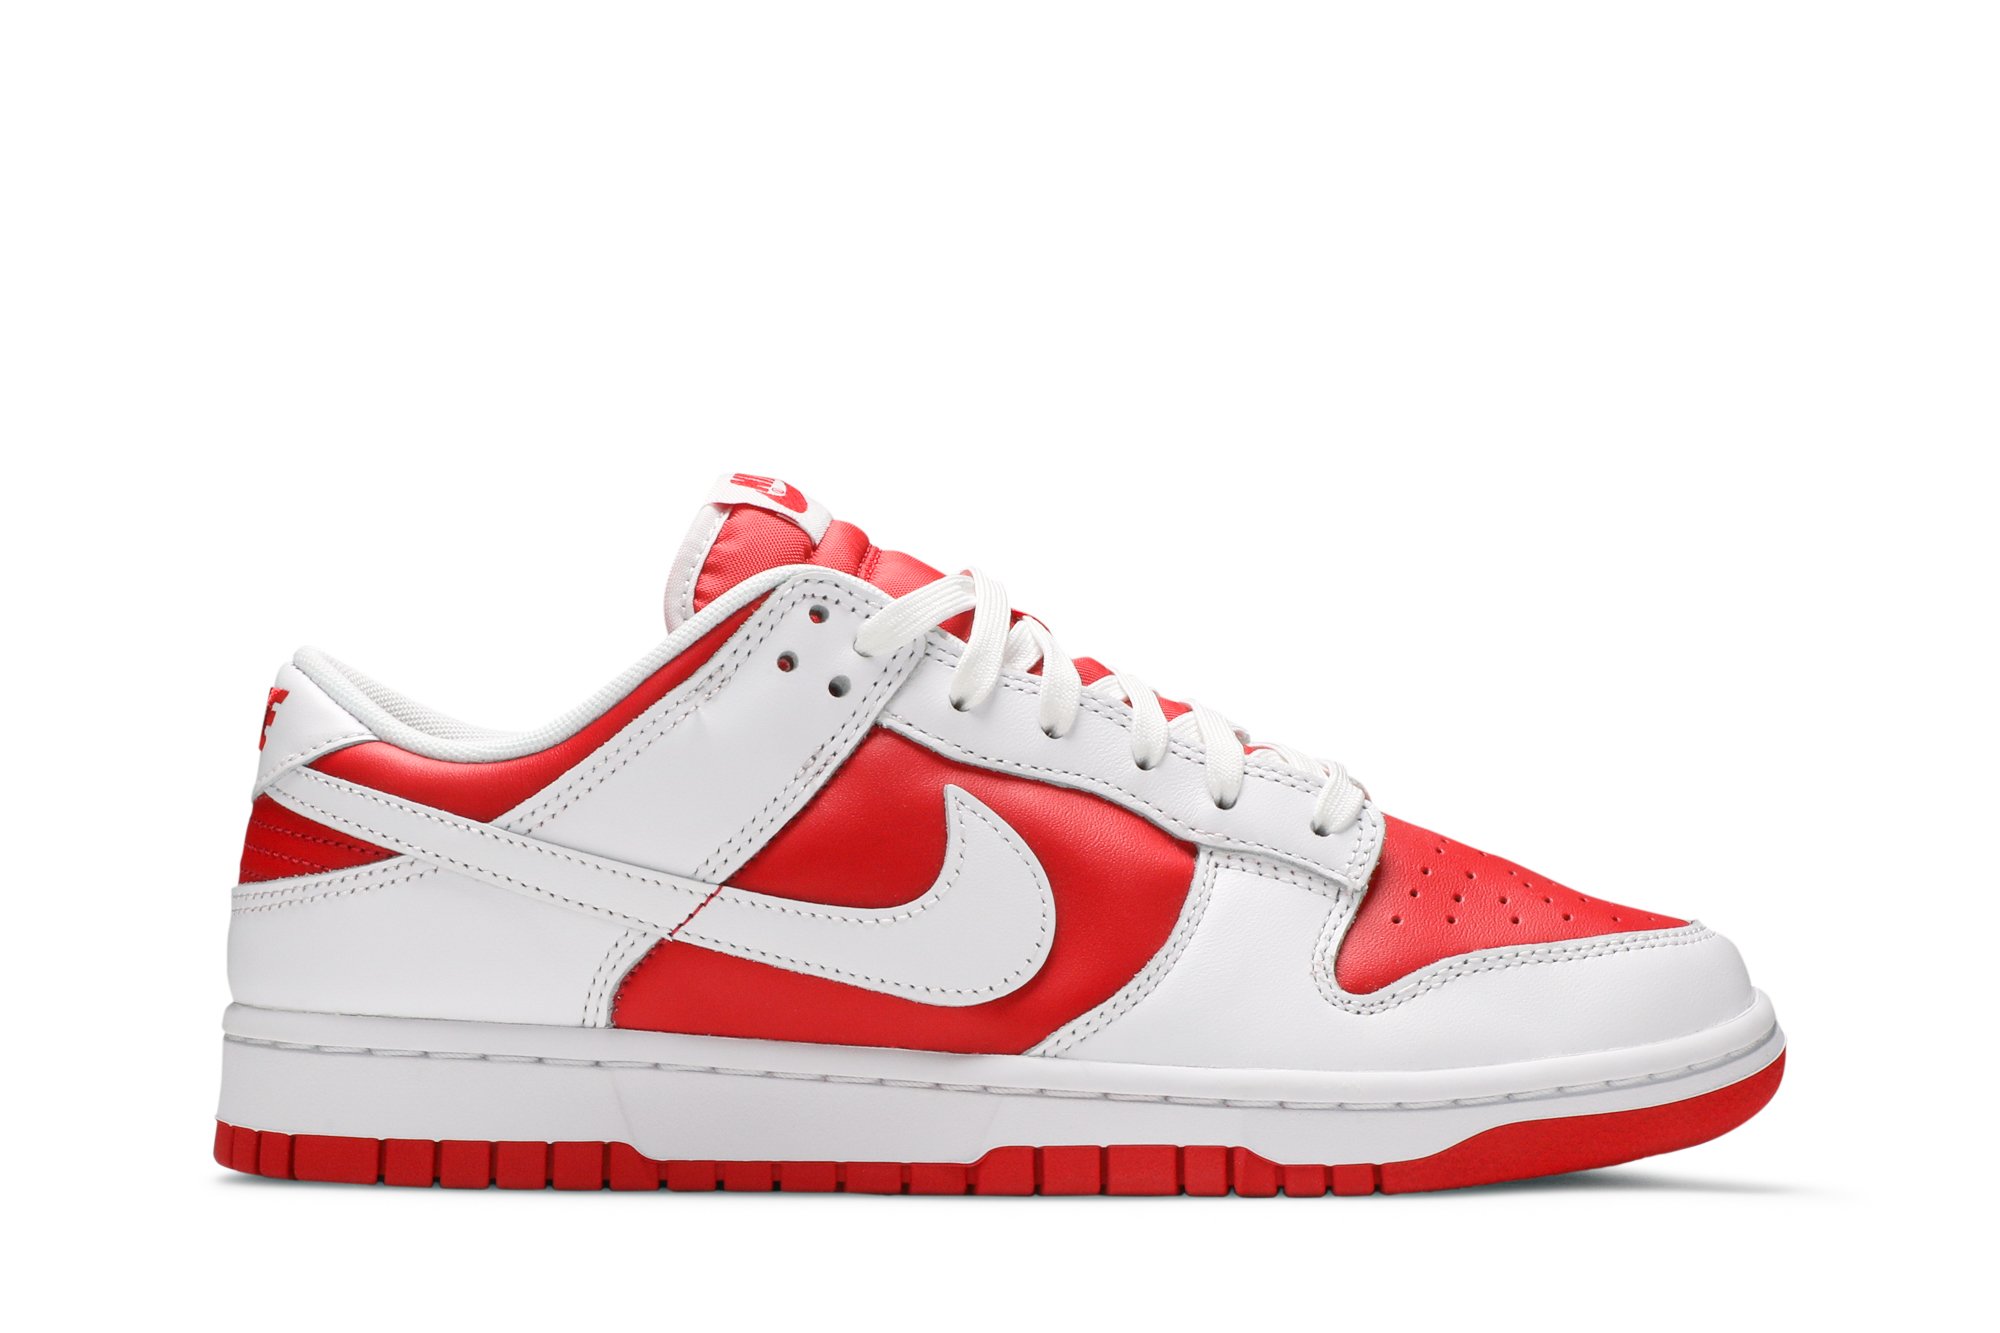 Buy Dunk Low 'Championship Red' - DD1391 600 | GOAT